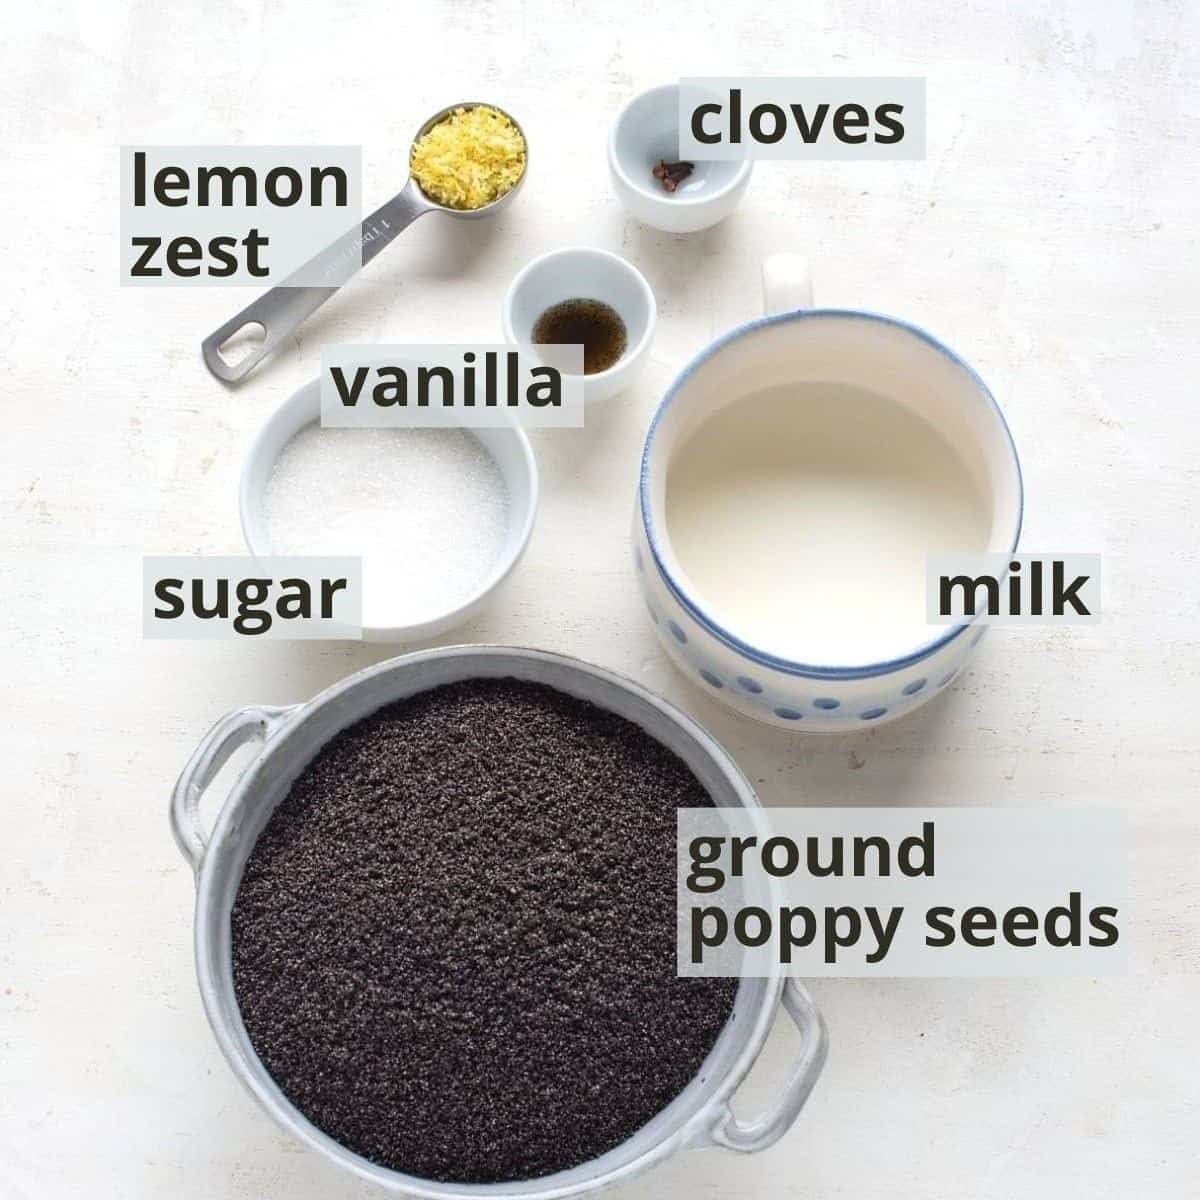 Ingredients for homemade poppyseed filling, inclusive captions.